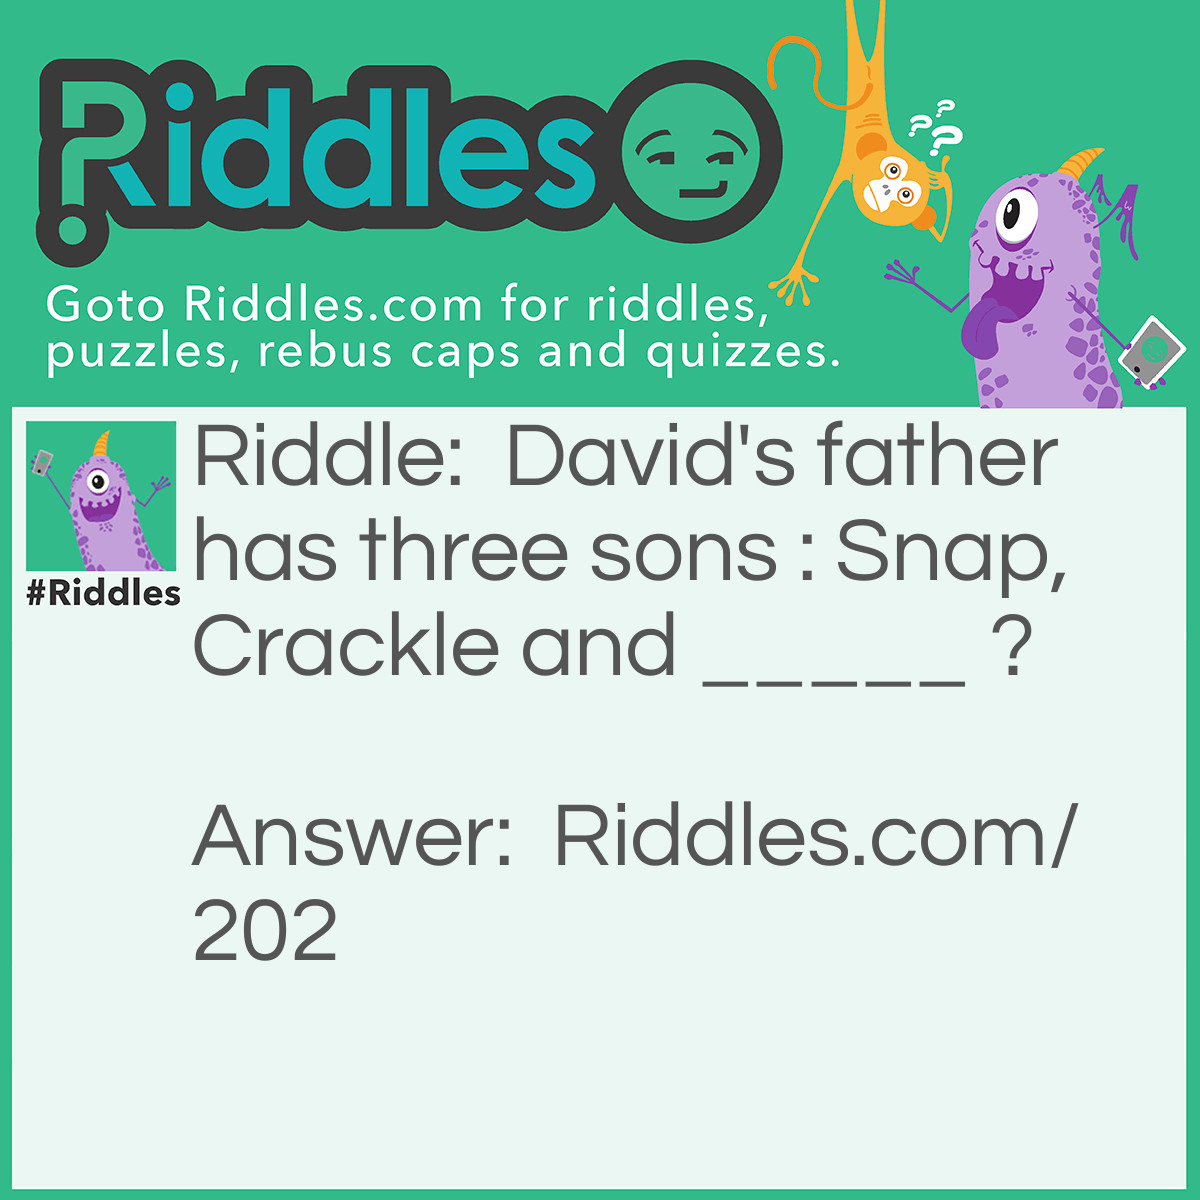 Riddle: David's <a href="https://www.riddles.com/quiz/fathers-day-riddles">father</a> has three sons: Snap, Crackle, and _____? Answer: David.